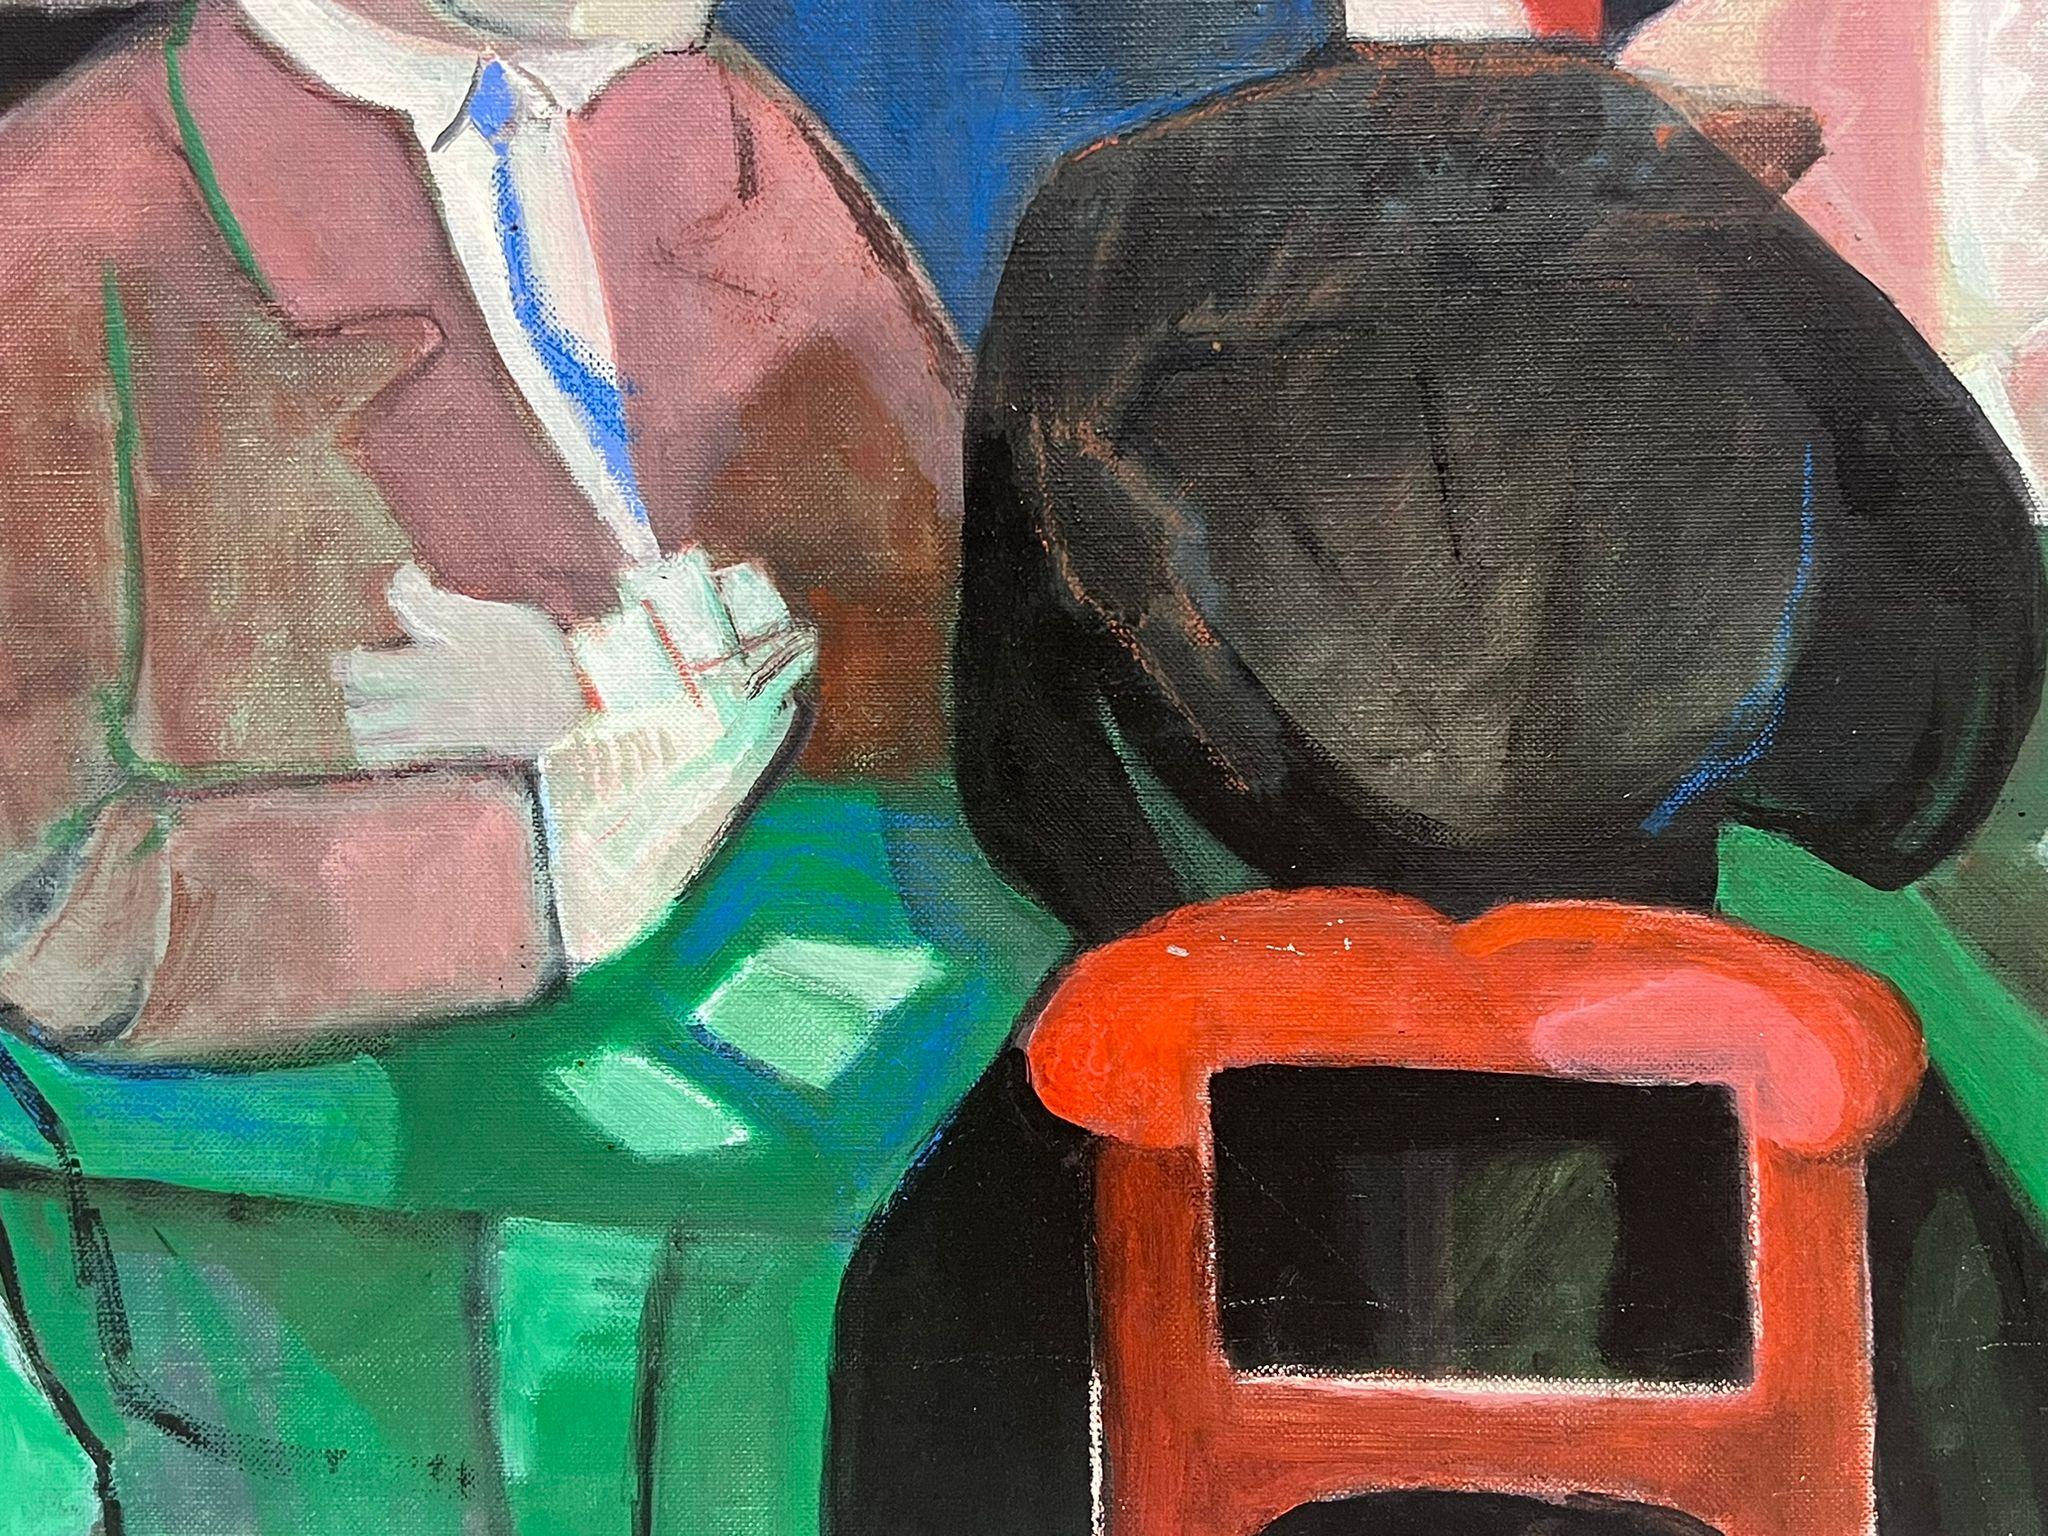 Large 1970's French Modernist Oil Painting The Card Game Players Casino Interior - Black Figurative Painting by French School